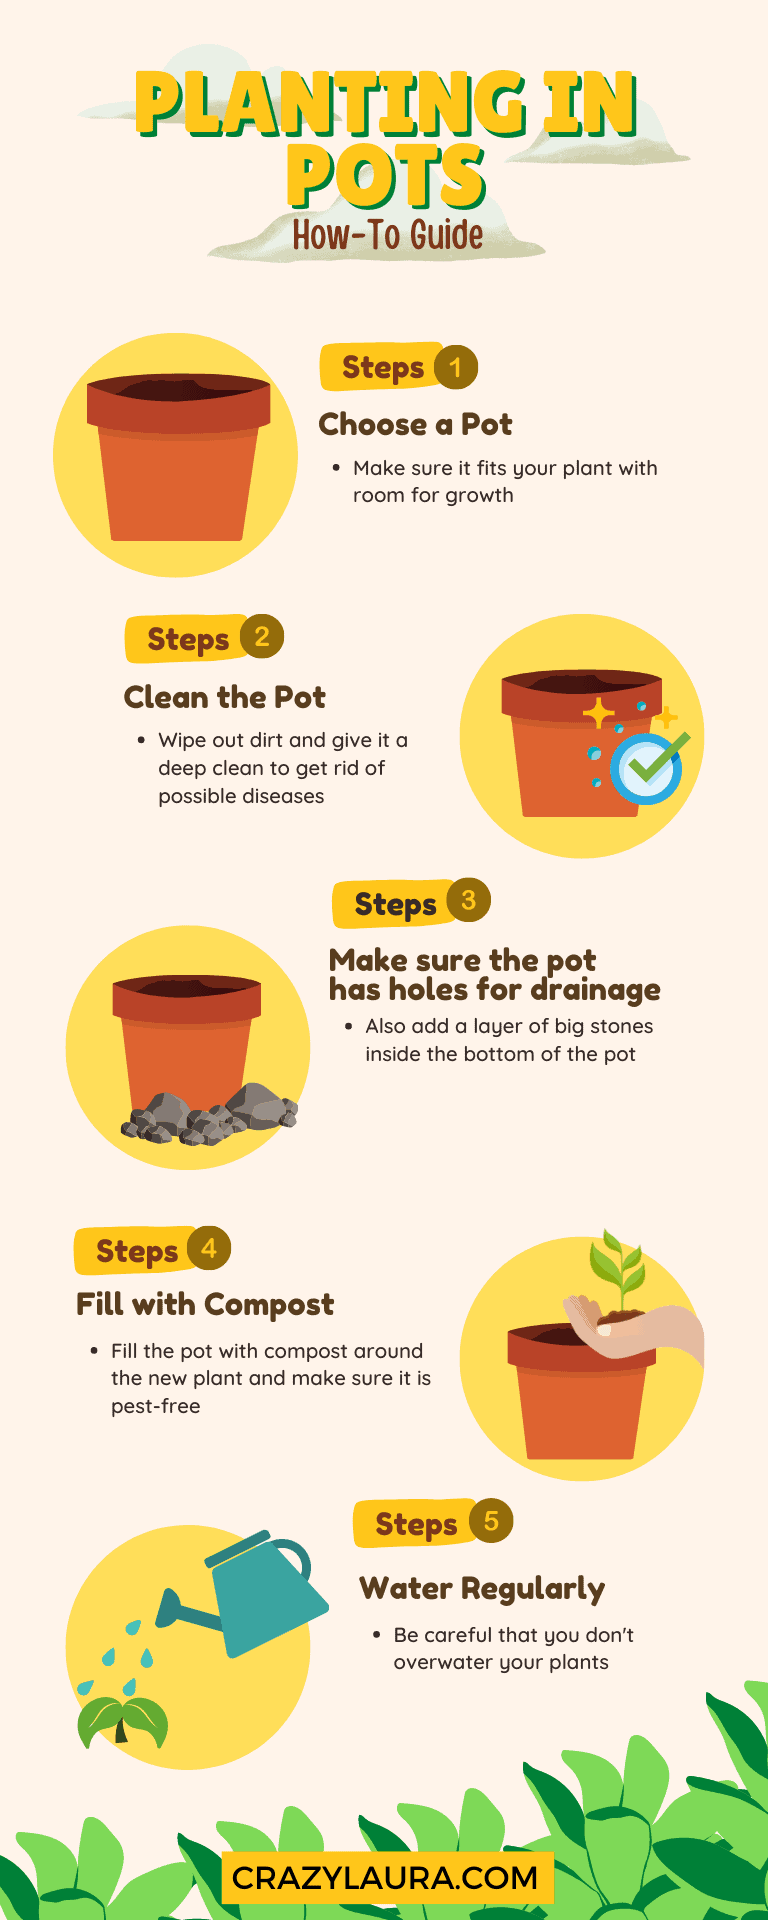 Infographic on Planting in Pots